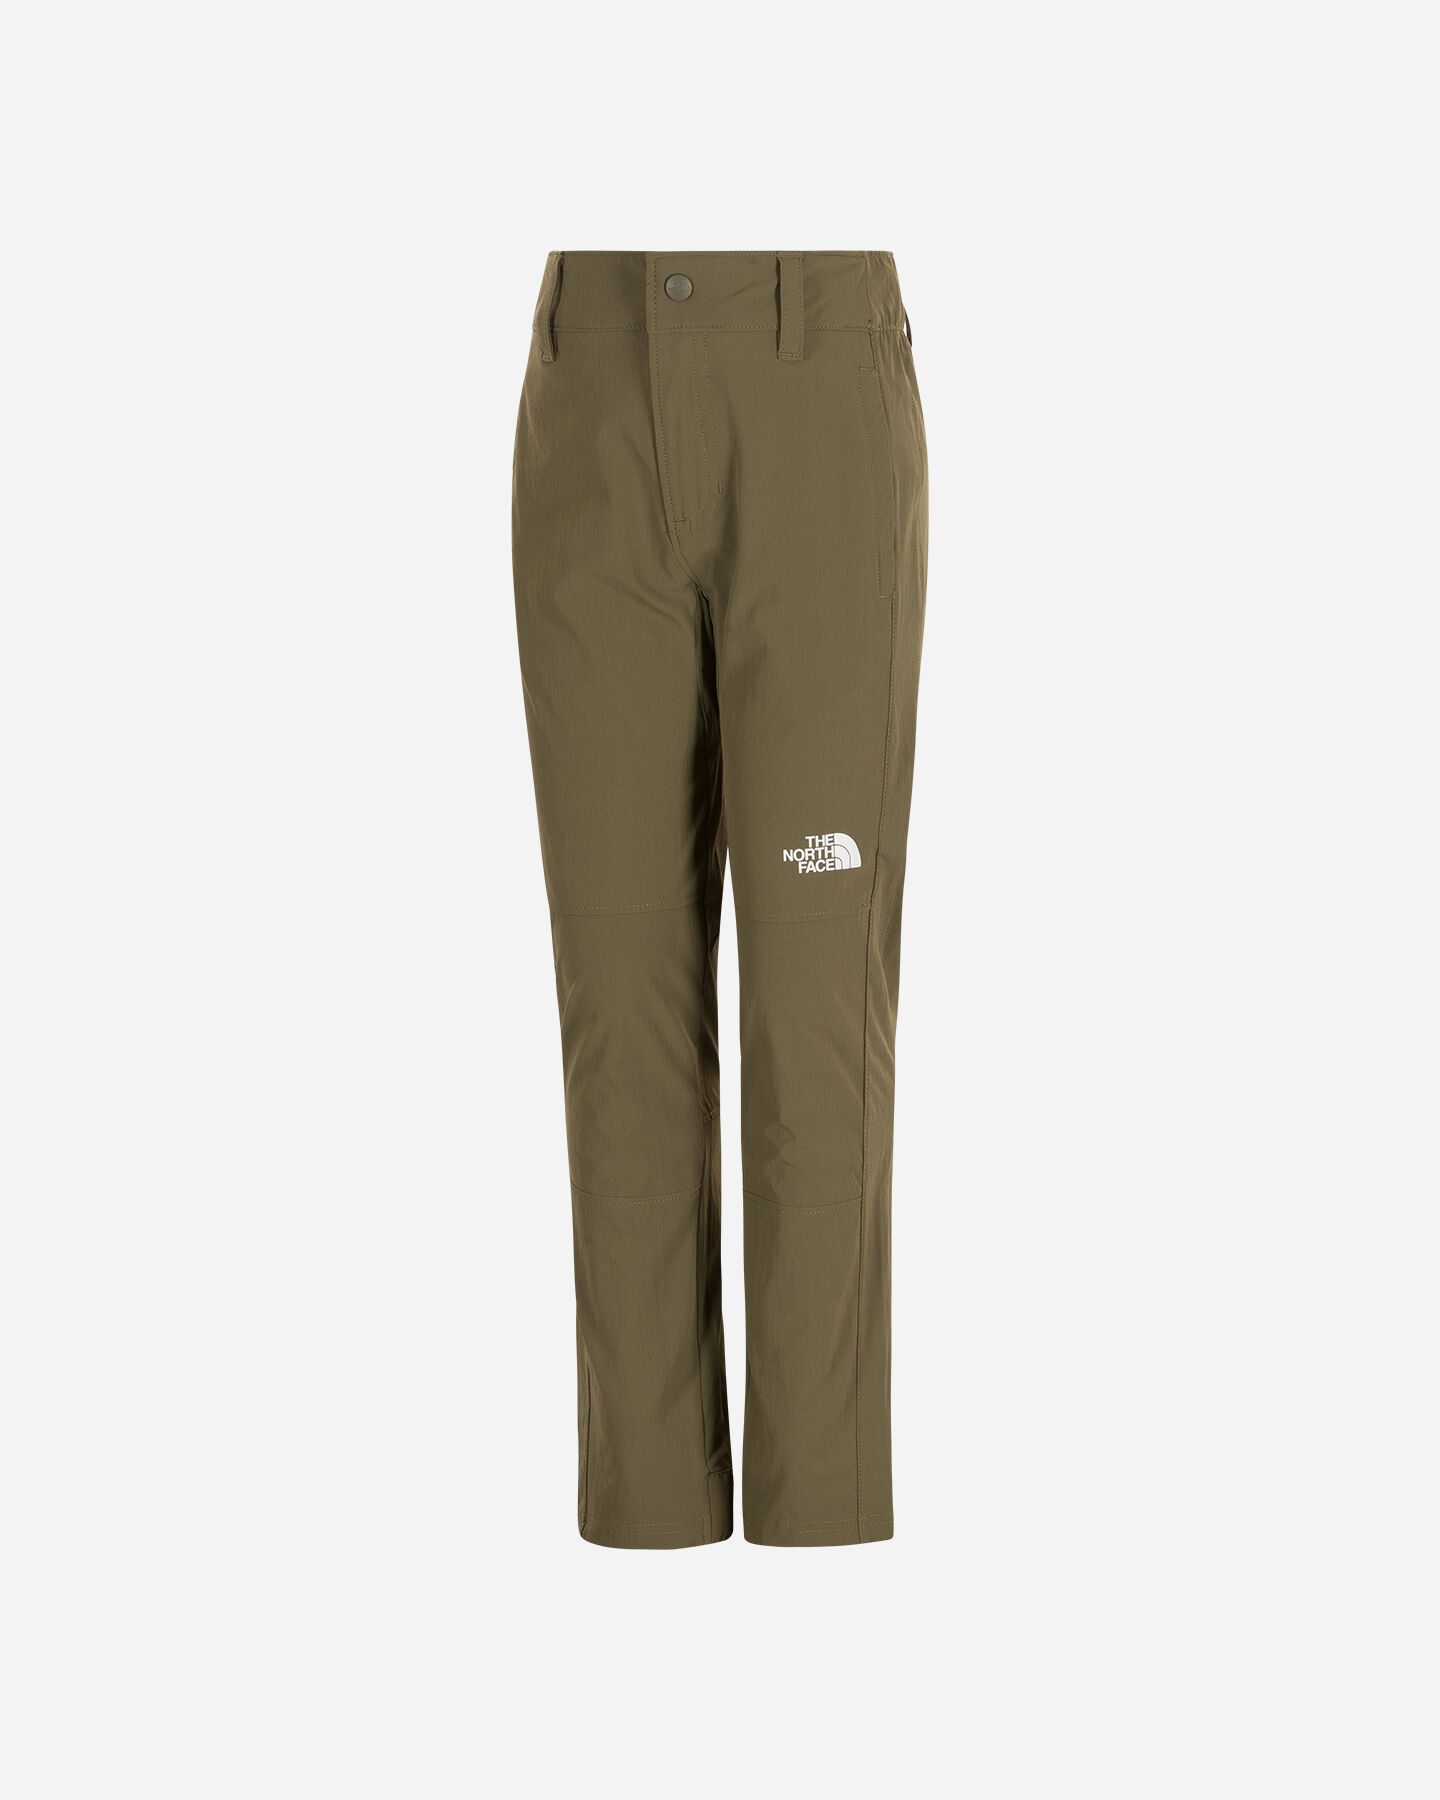  Pantalone outdoor THE NORTH FACE EXPLORATION BURNT OLIVE GREE JR S5409406|7D6|REGS scatto 0